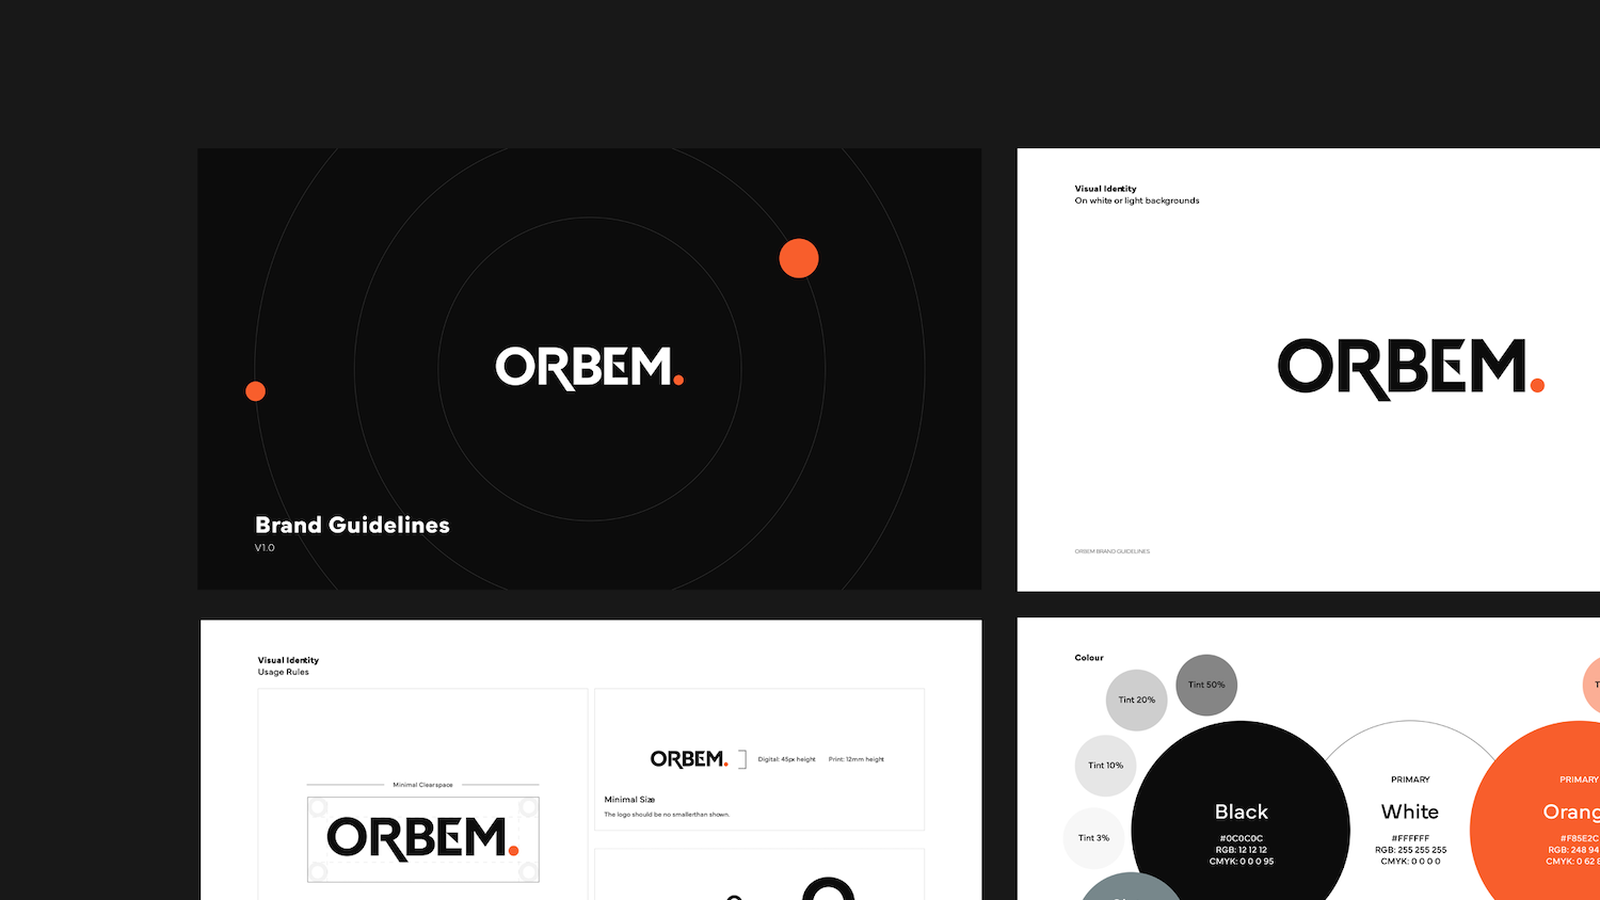 An artboard of Orbem's brand guidelines and designs.